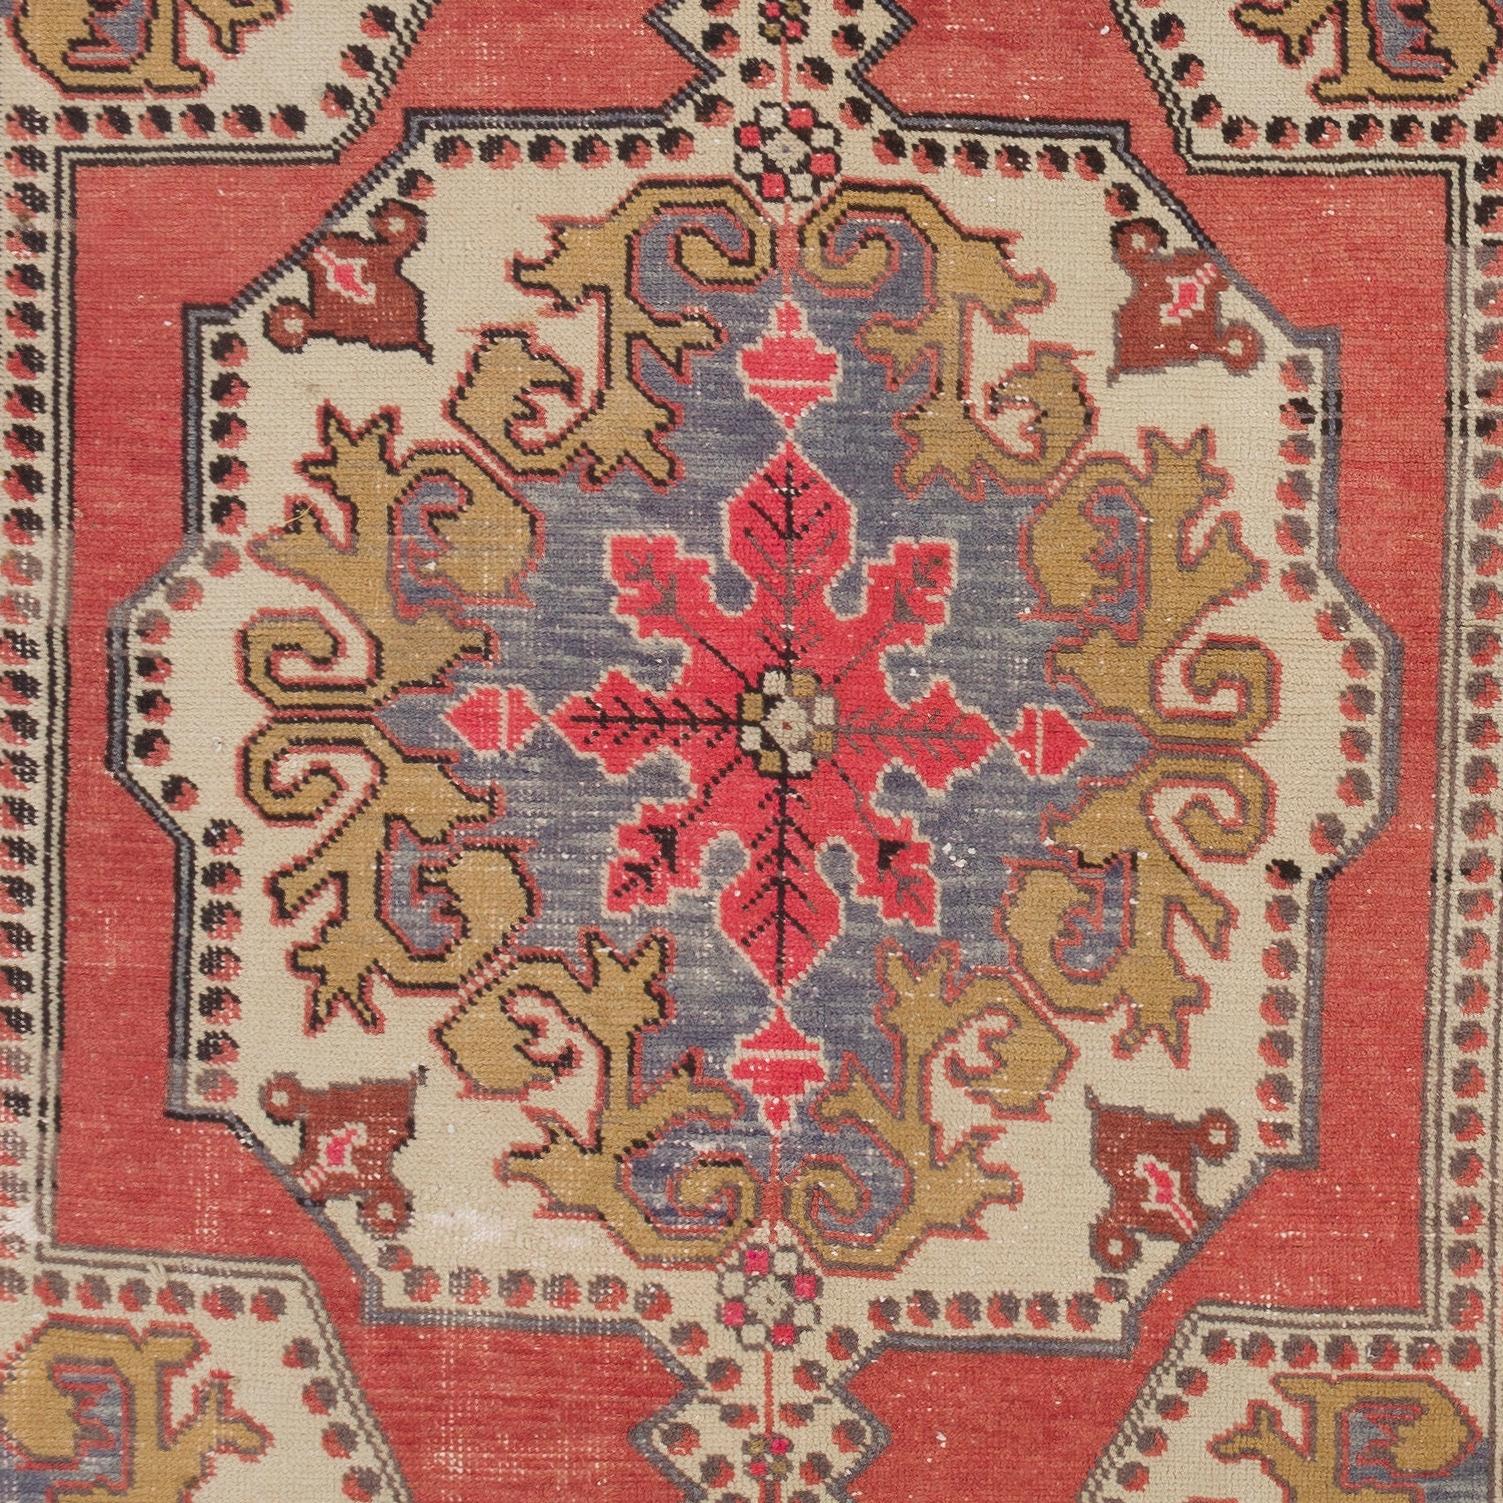 A finely hand knotted vintage Central Anatolian rug depicting a garden design with flowers, spandrels, blossoms, leaves and branches.
Wool pile on a tightly woven sturdy cotton foundation, very good condition. Measures: 4.2 x 7.2 ft.

It has been